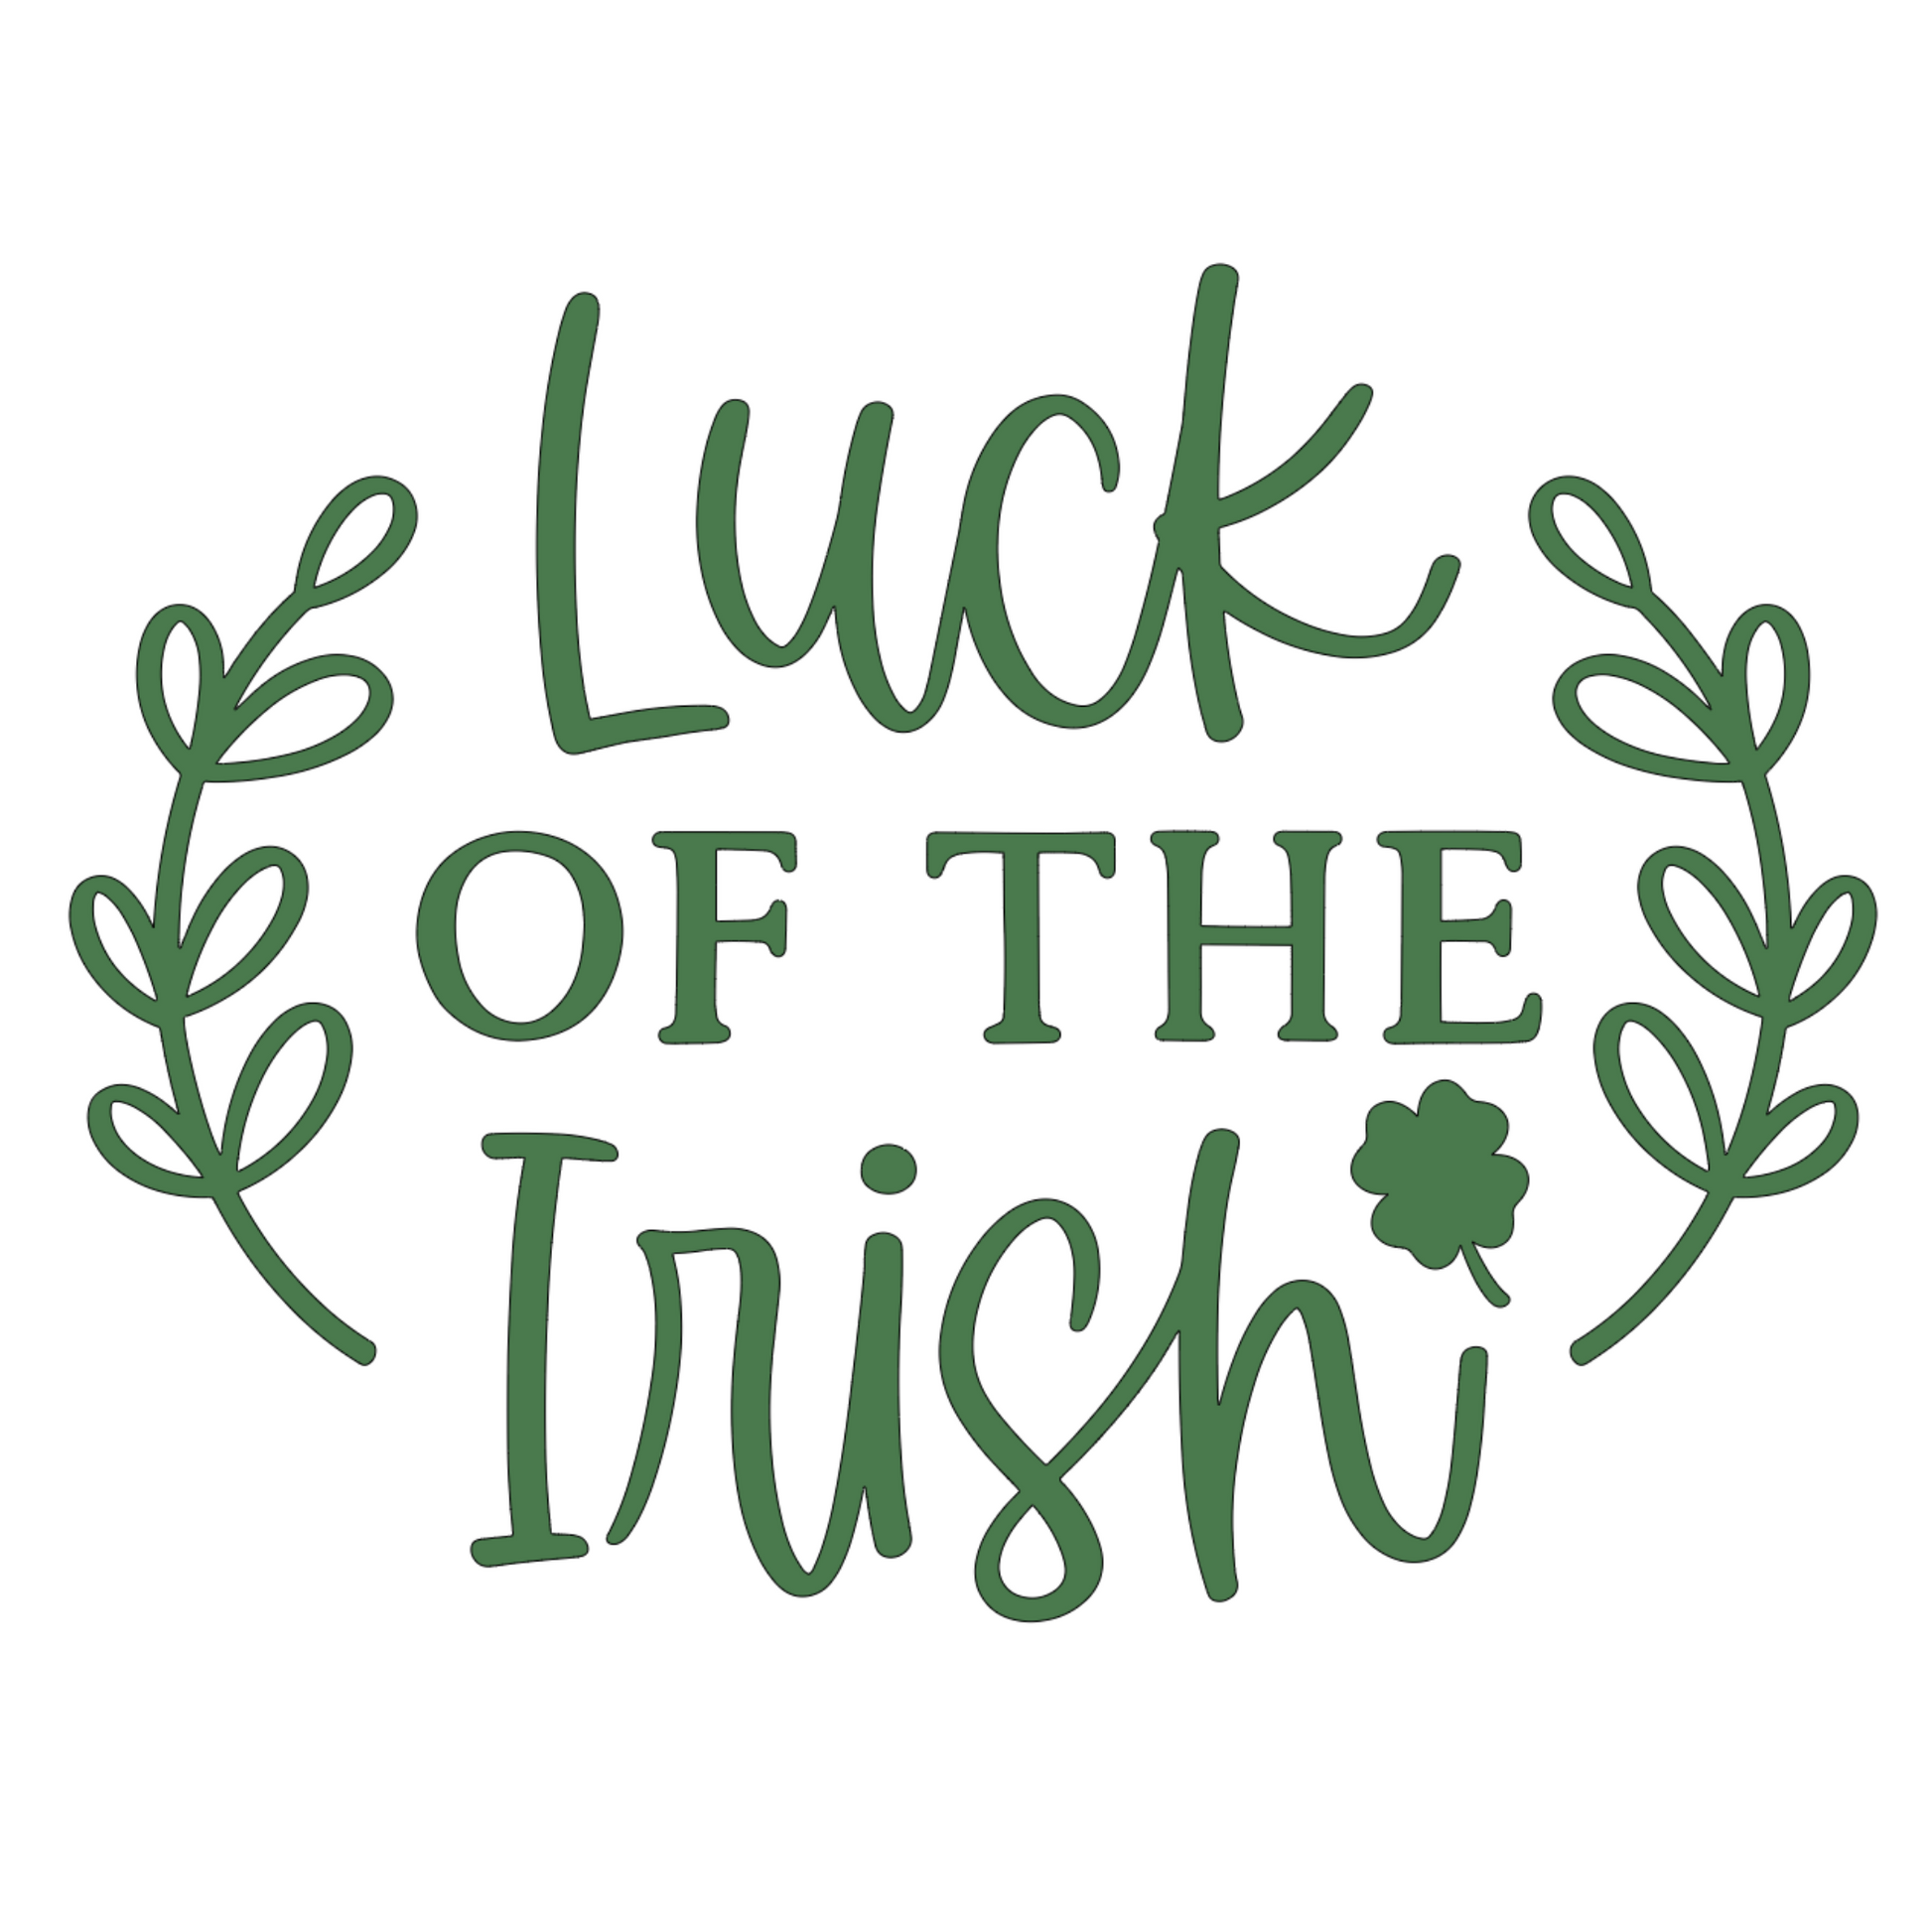 Luck Of The Irish - Pull Over Sweatshirt in a heather light gray. Luck Of The Irish quote on the sweatshirt is a medium green with cute leaves enclosing the design and a small four leaf clover. This is a close up of the design on white.